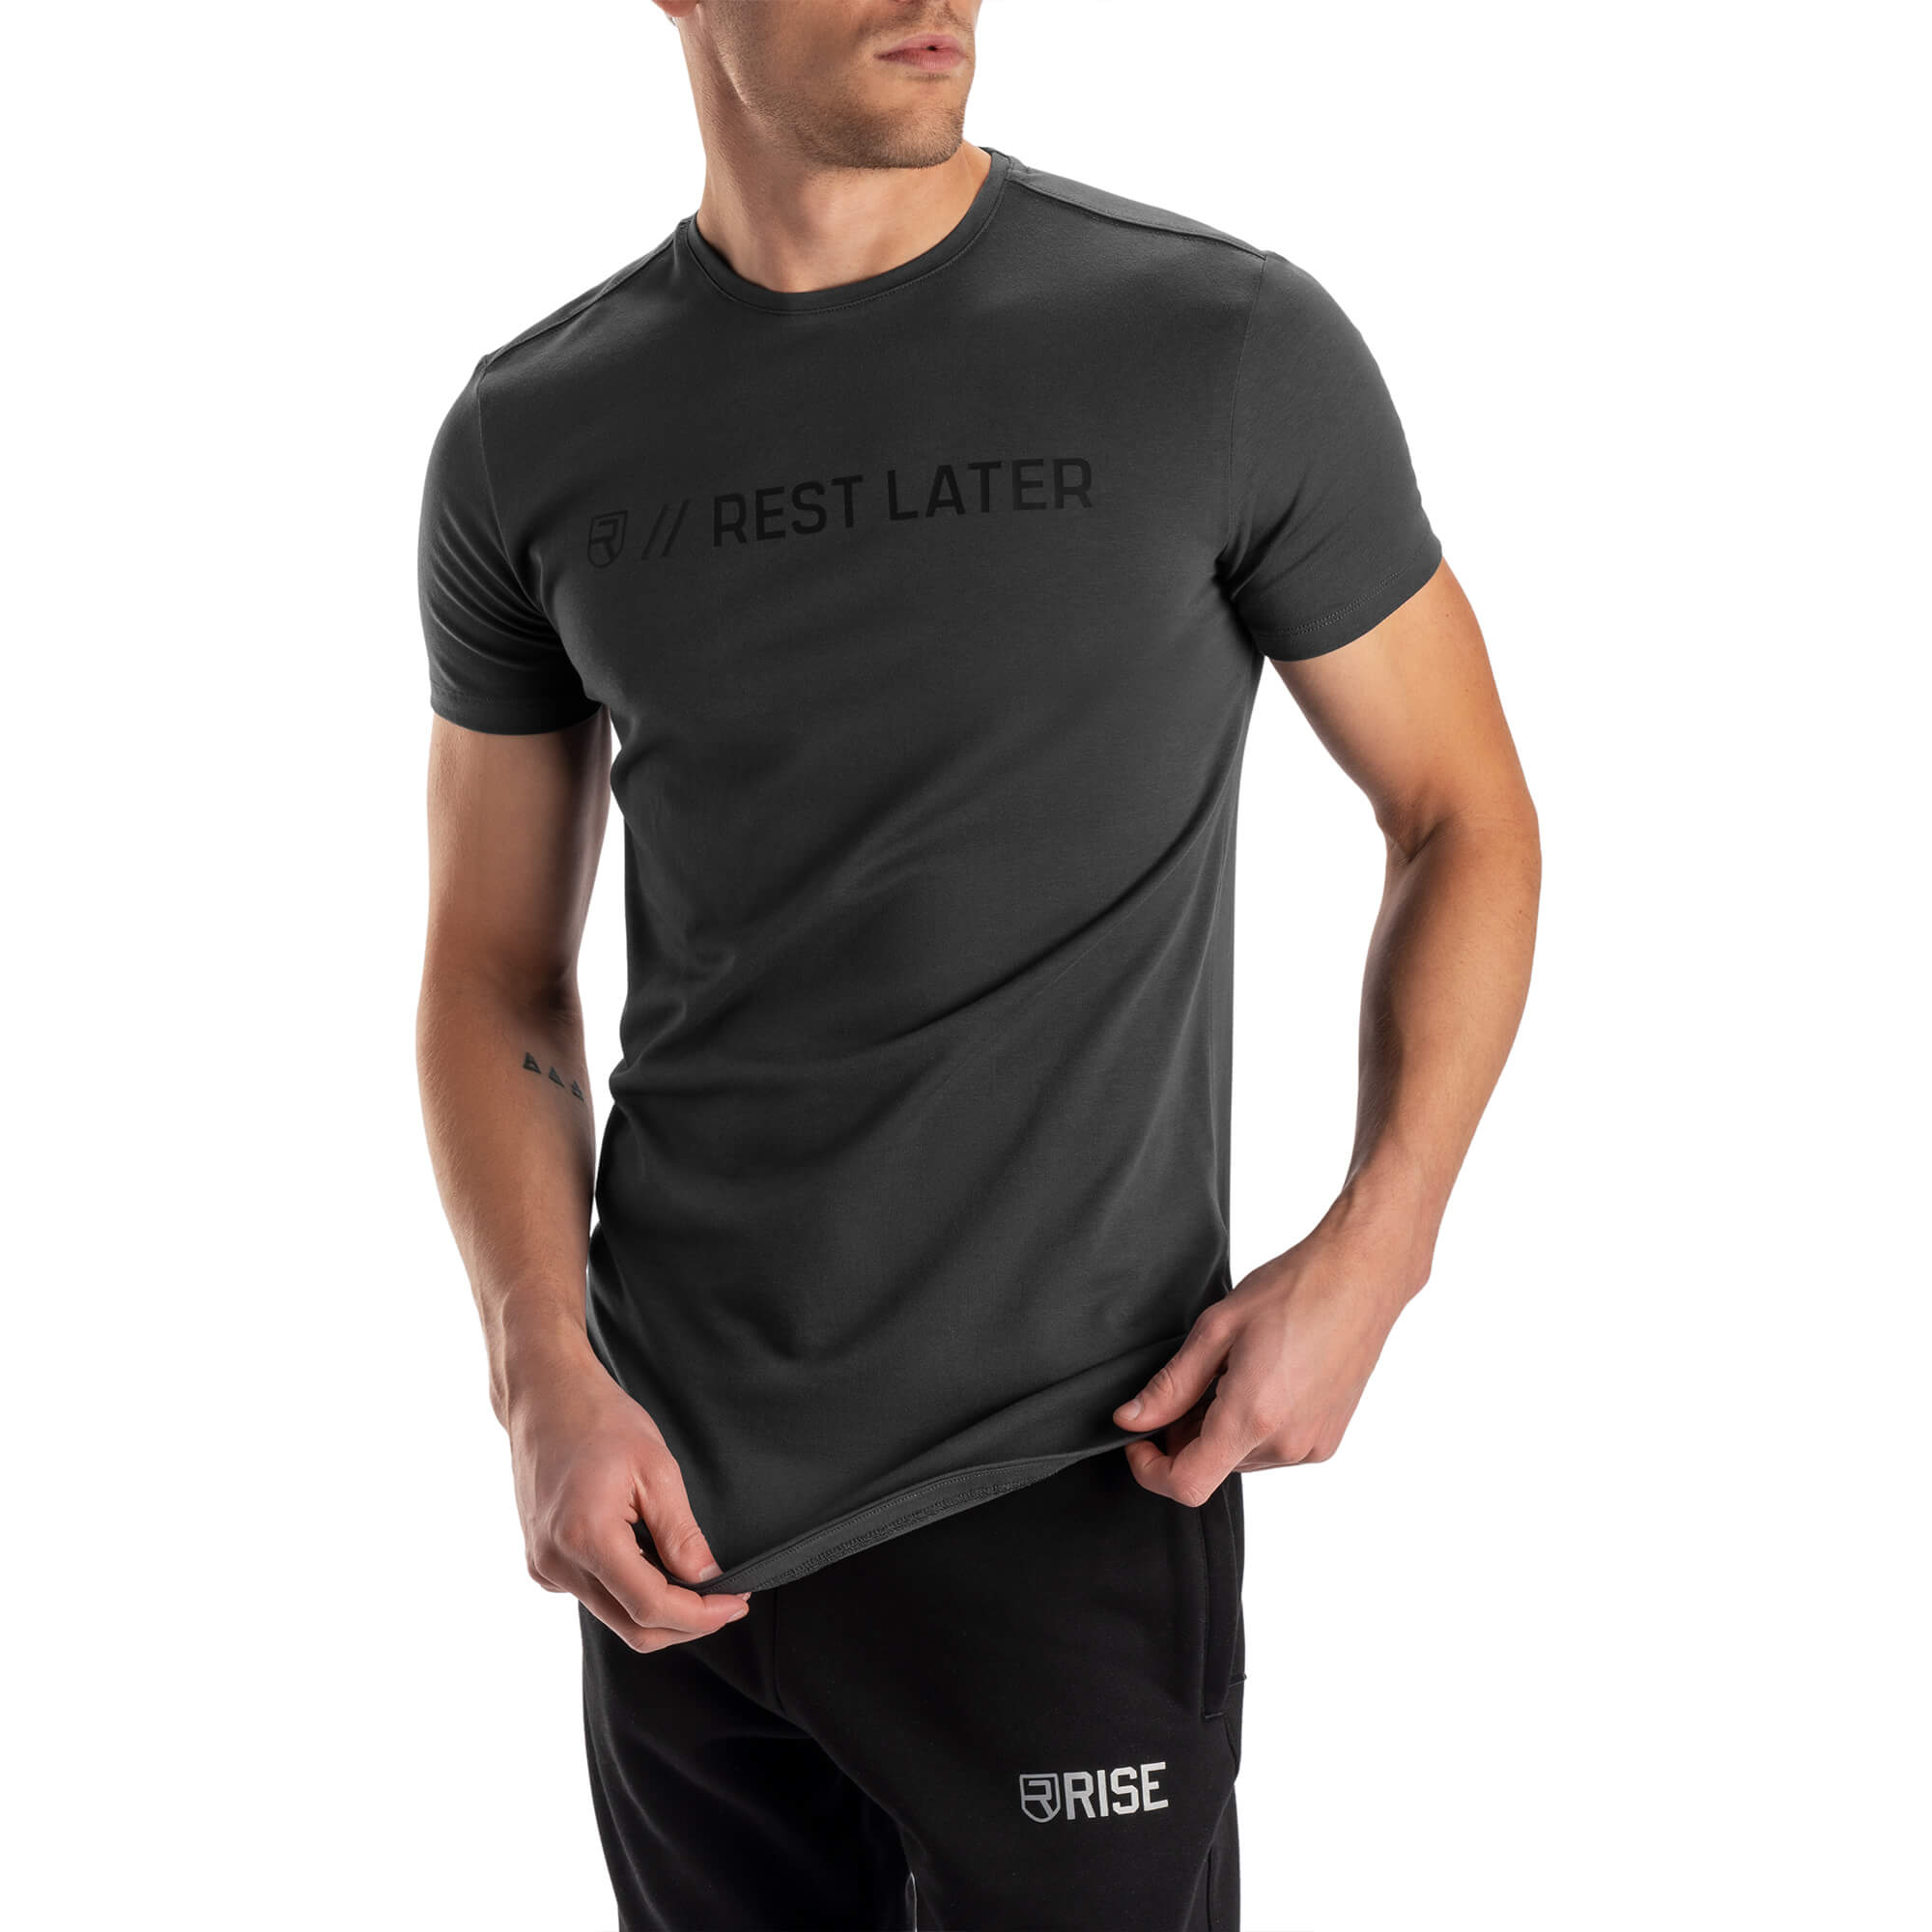 https://cdn.shopify.com/s/files/1/0237/0025/products/Rest-Later-T-Shirt-Graphite-3_2000x.jpg?v=1638051414